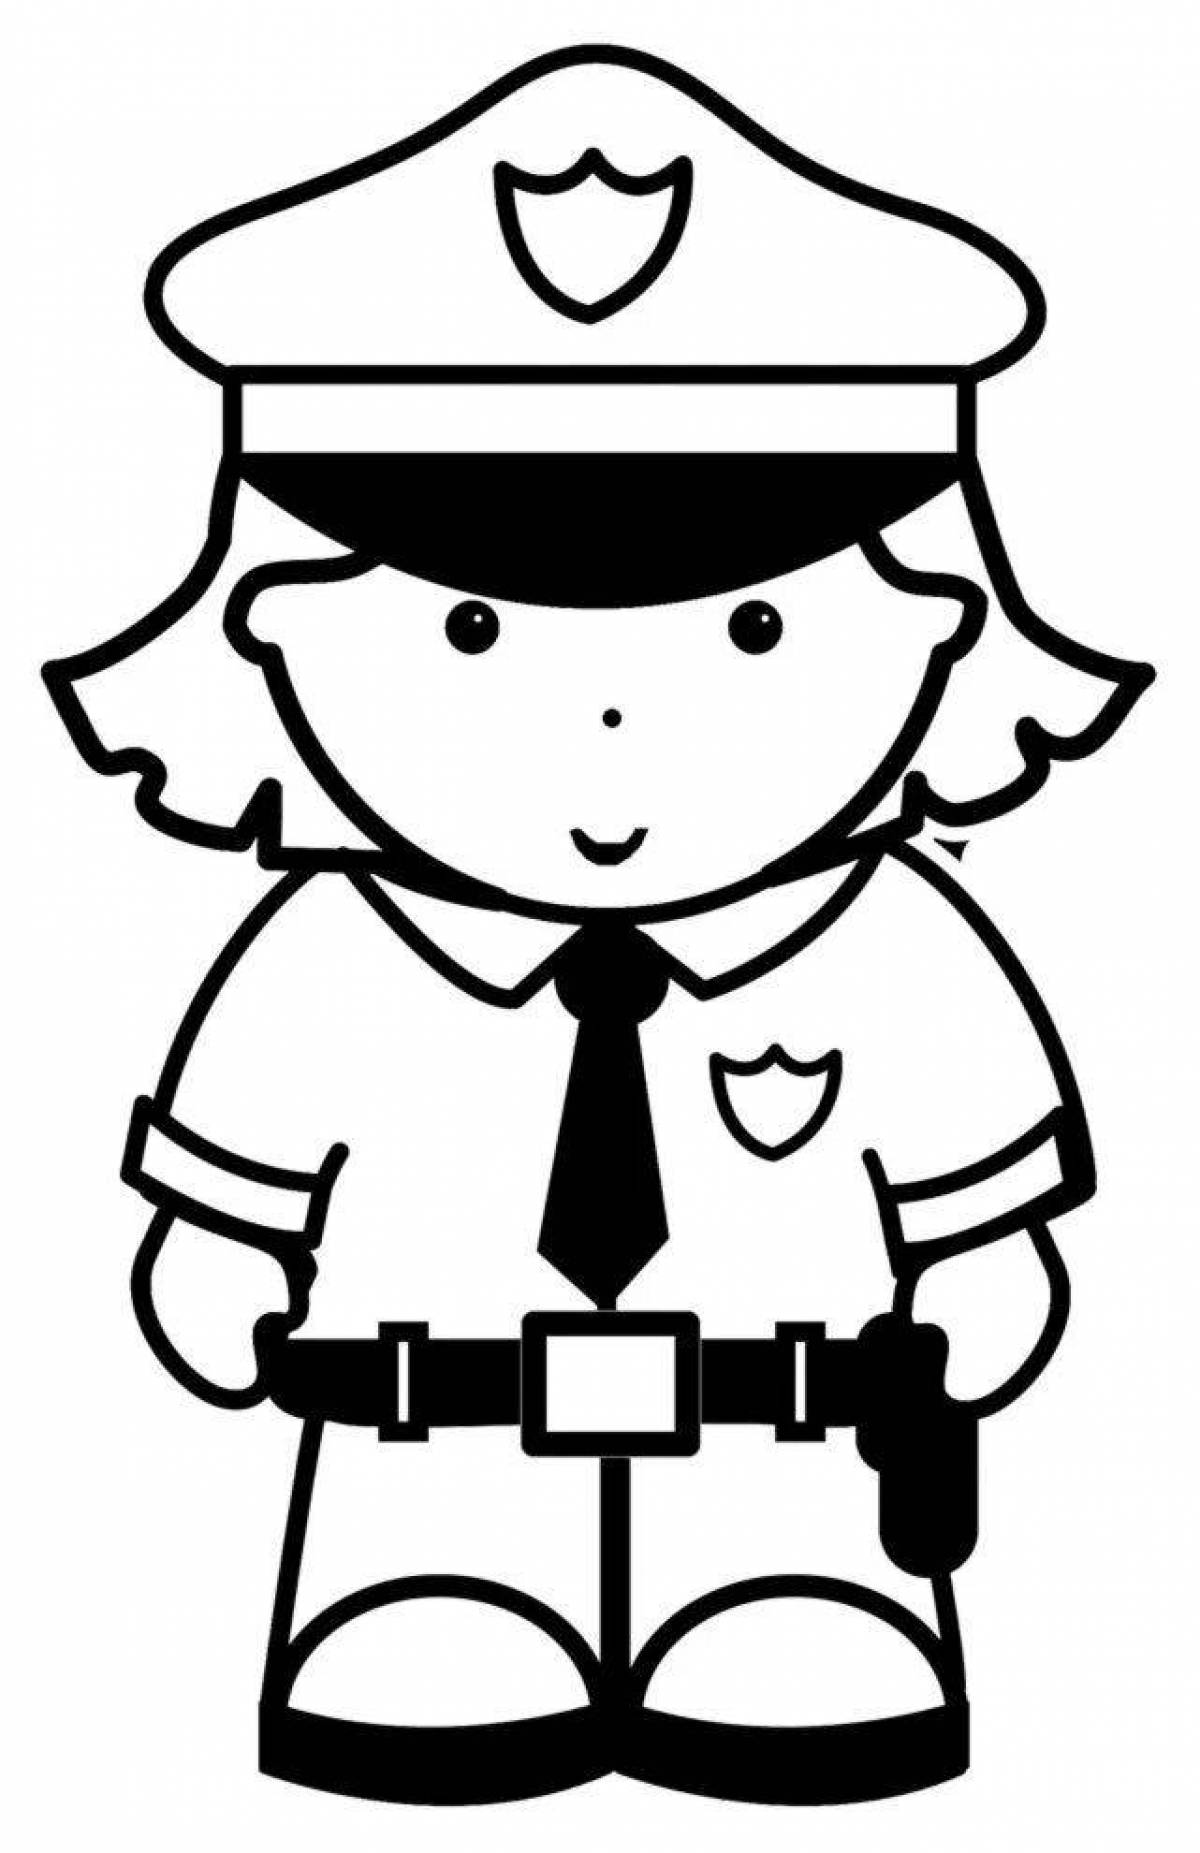 Charming security guard coloring book